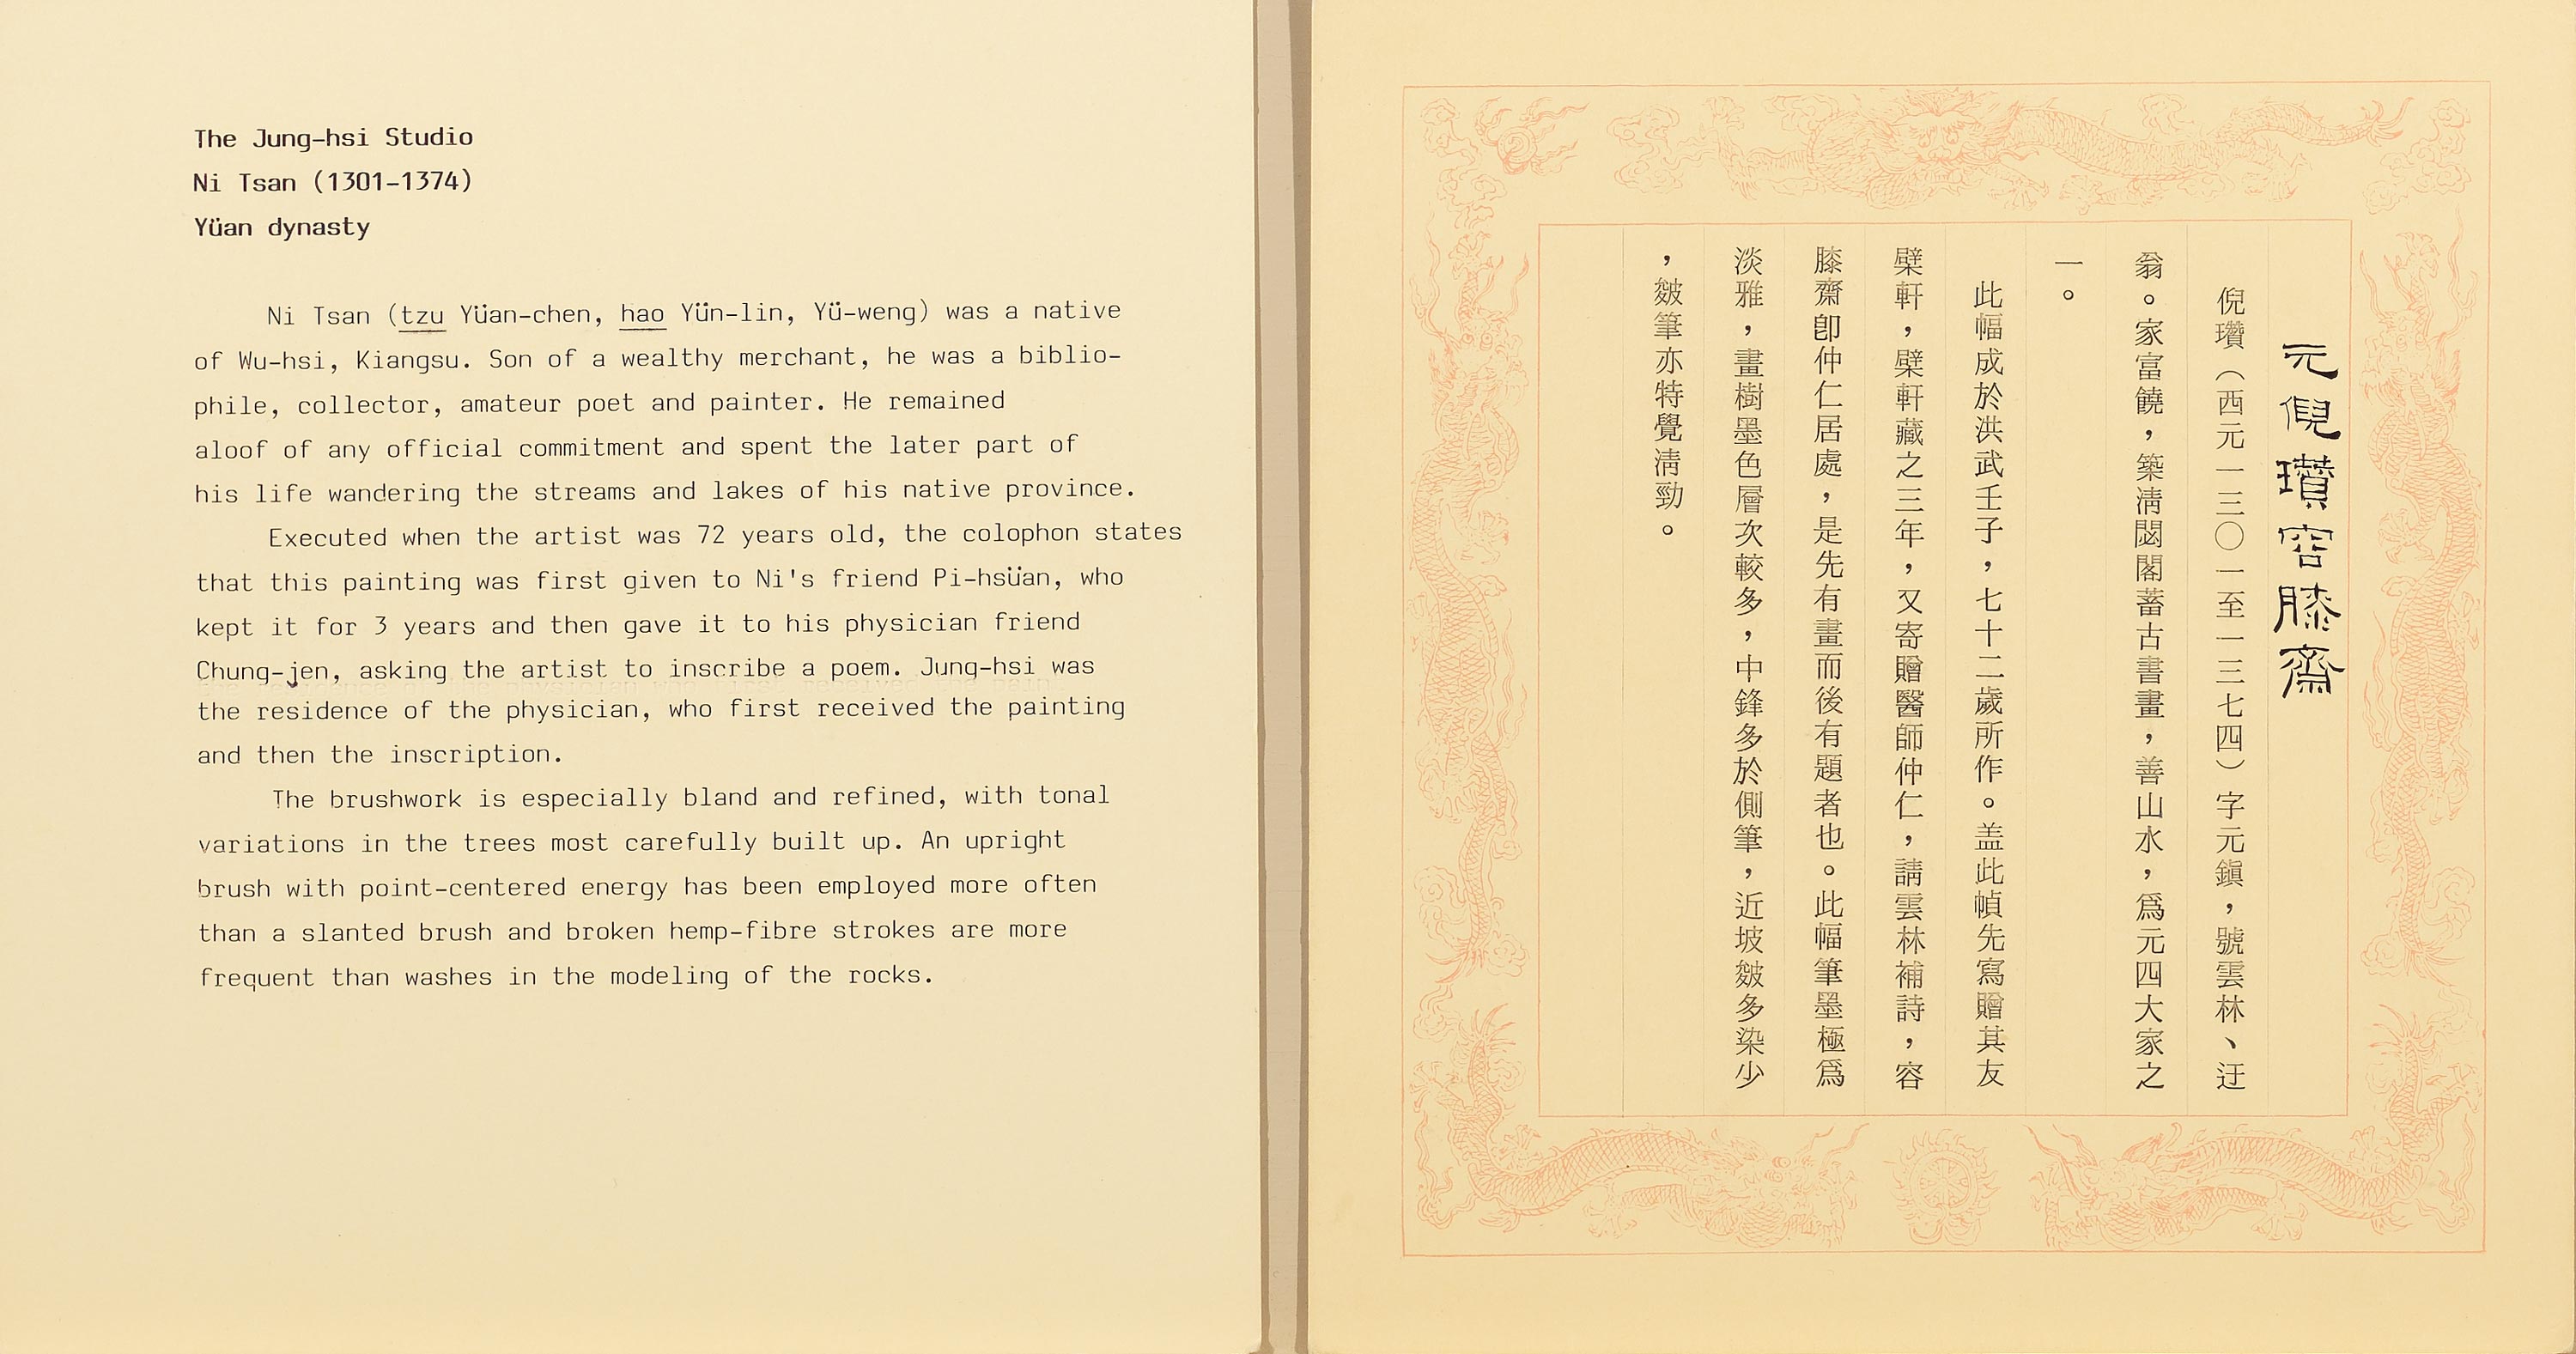 In the early to mid-1990s, the titles of exhibit works on dragon-border cards were still written in brush and ink. The title of this card was calligraphed by Chiang Chao-shen.